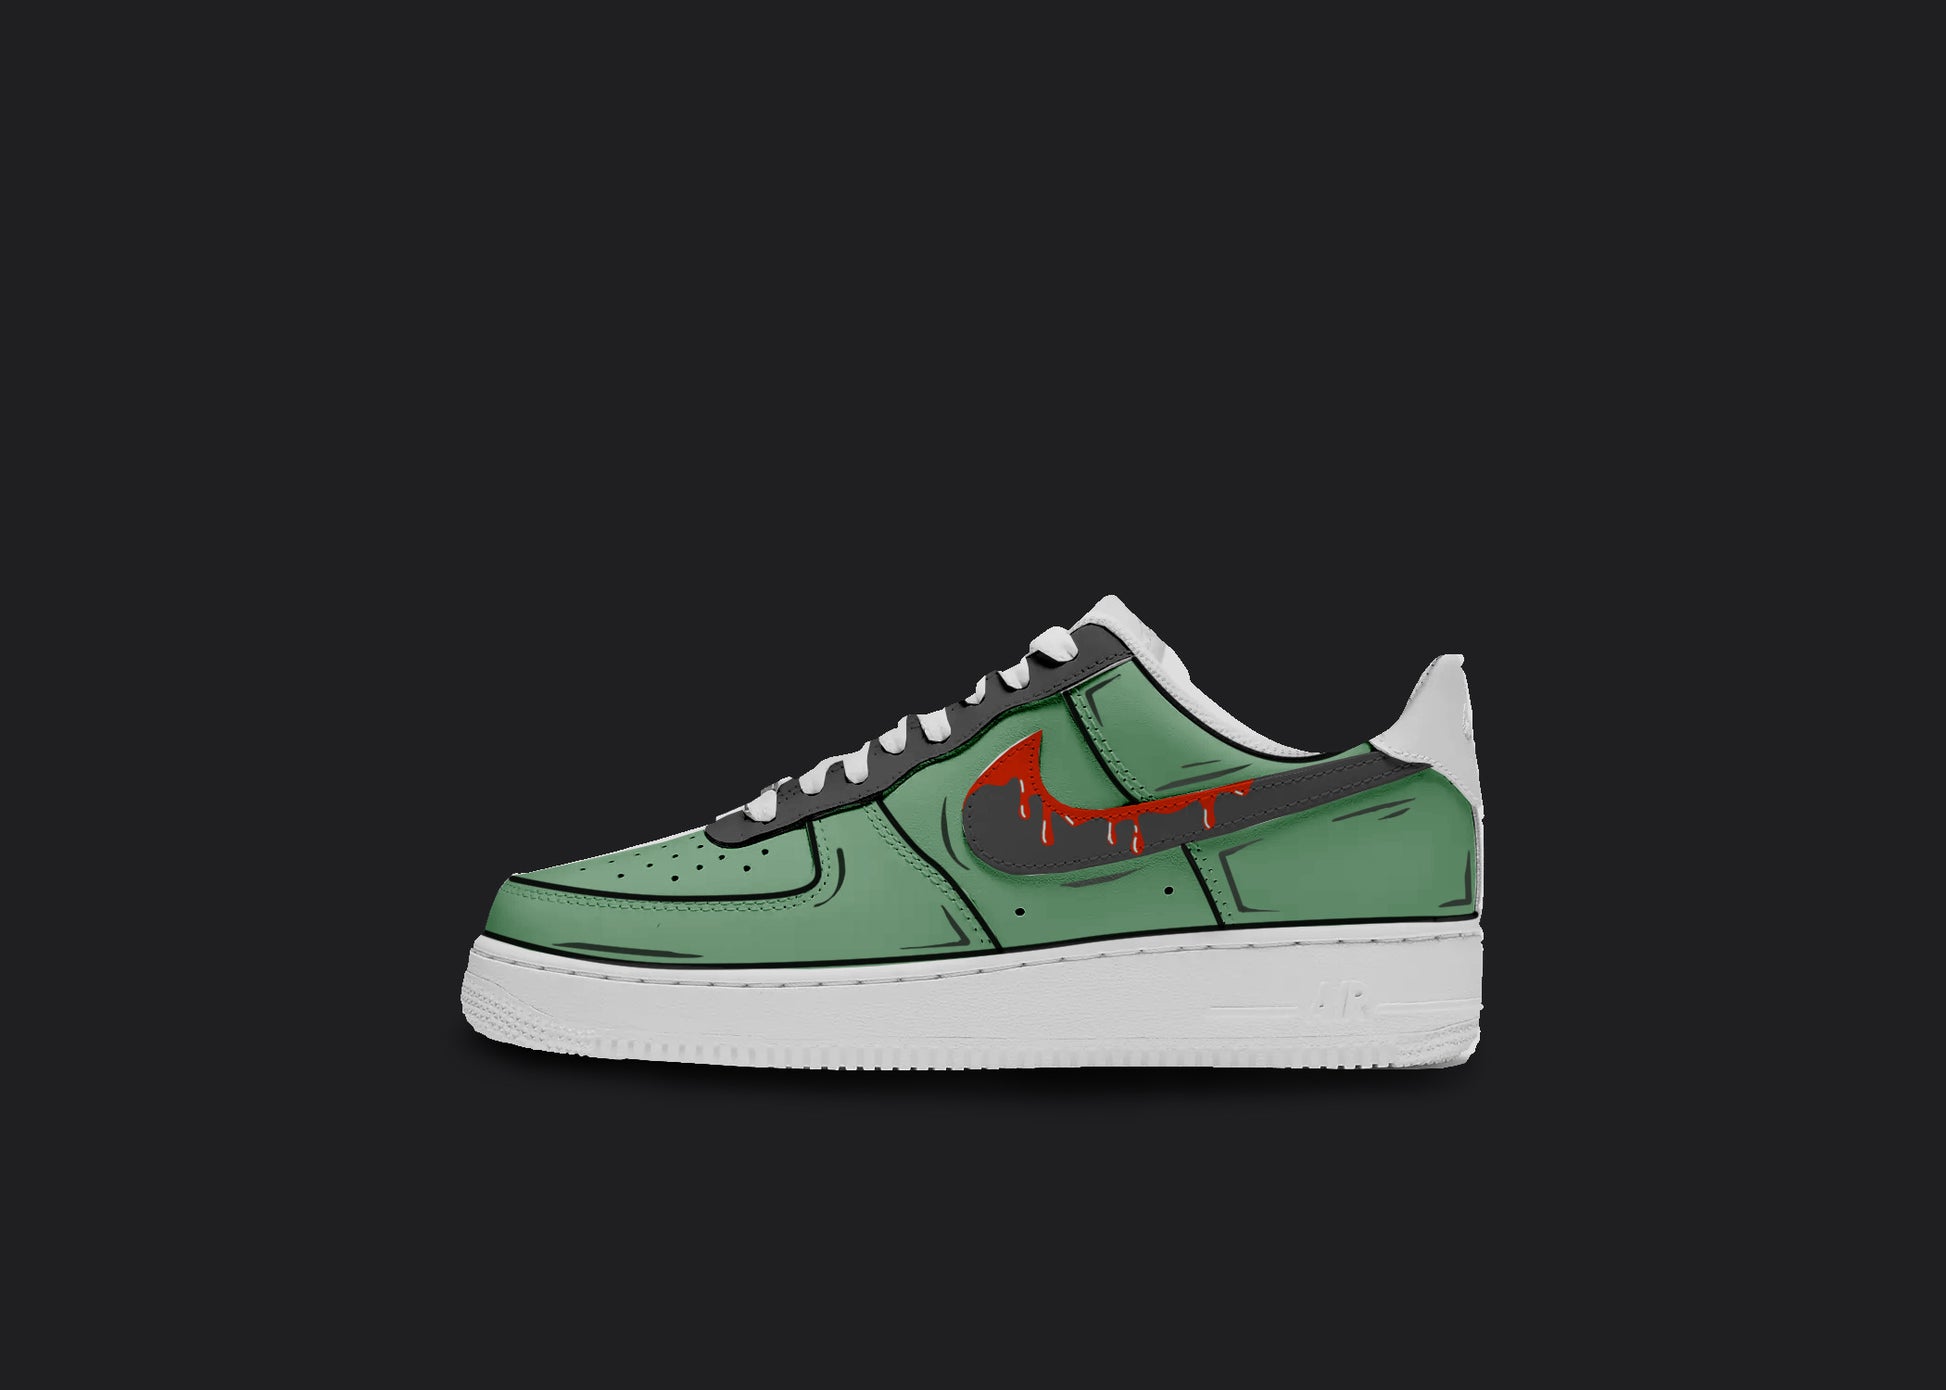 The image is of a Custom Nike Air force 1 sneaker on a blank black background. The white custom nike sneaker has a zombie like design all over the sneaker with red dripping details on the side.  